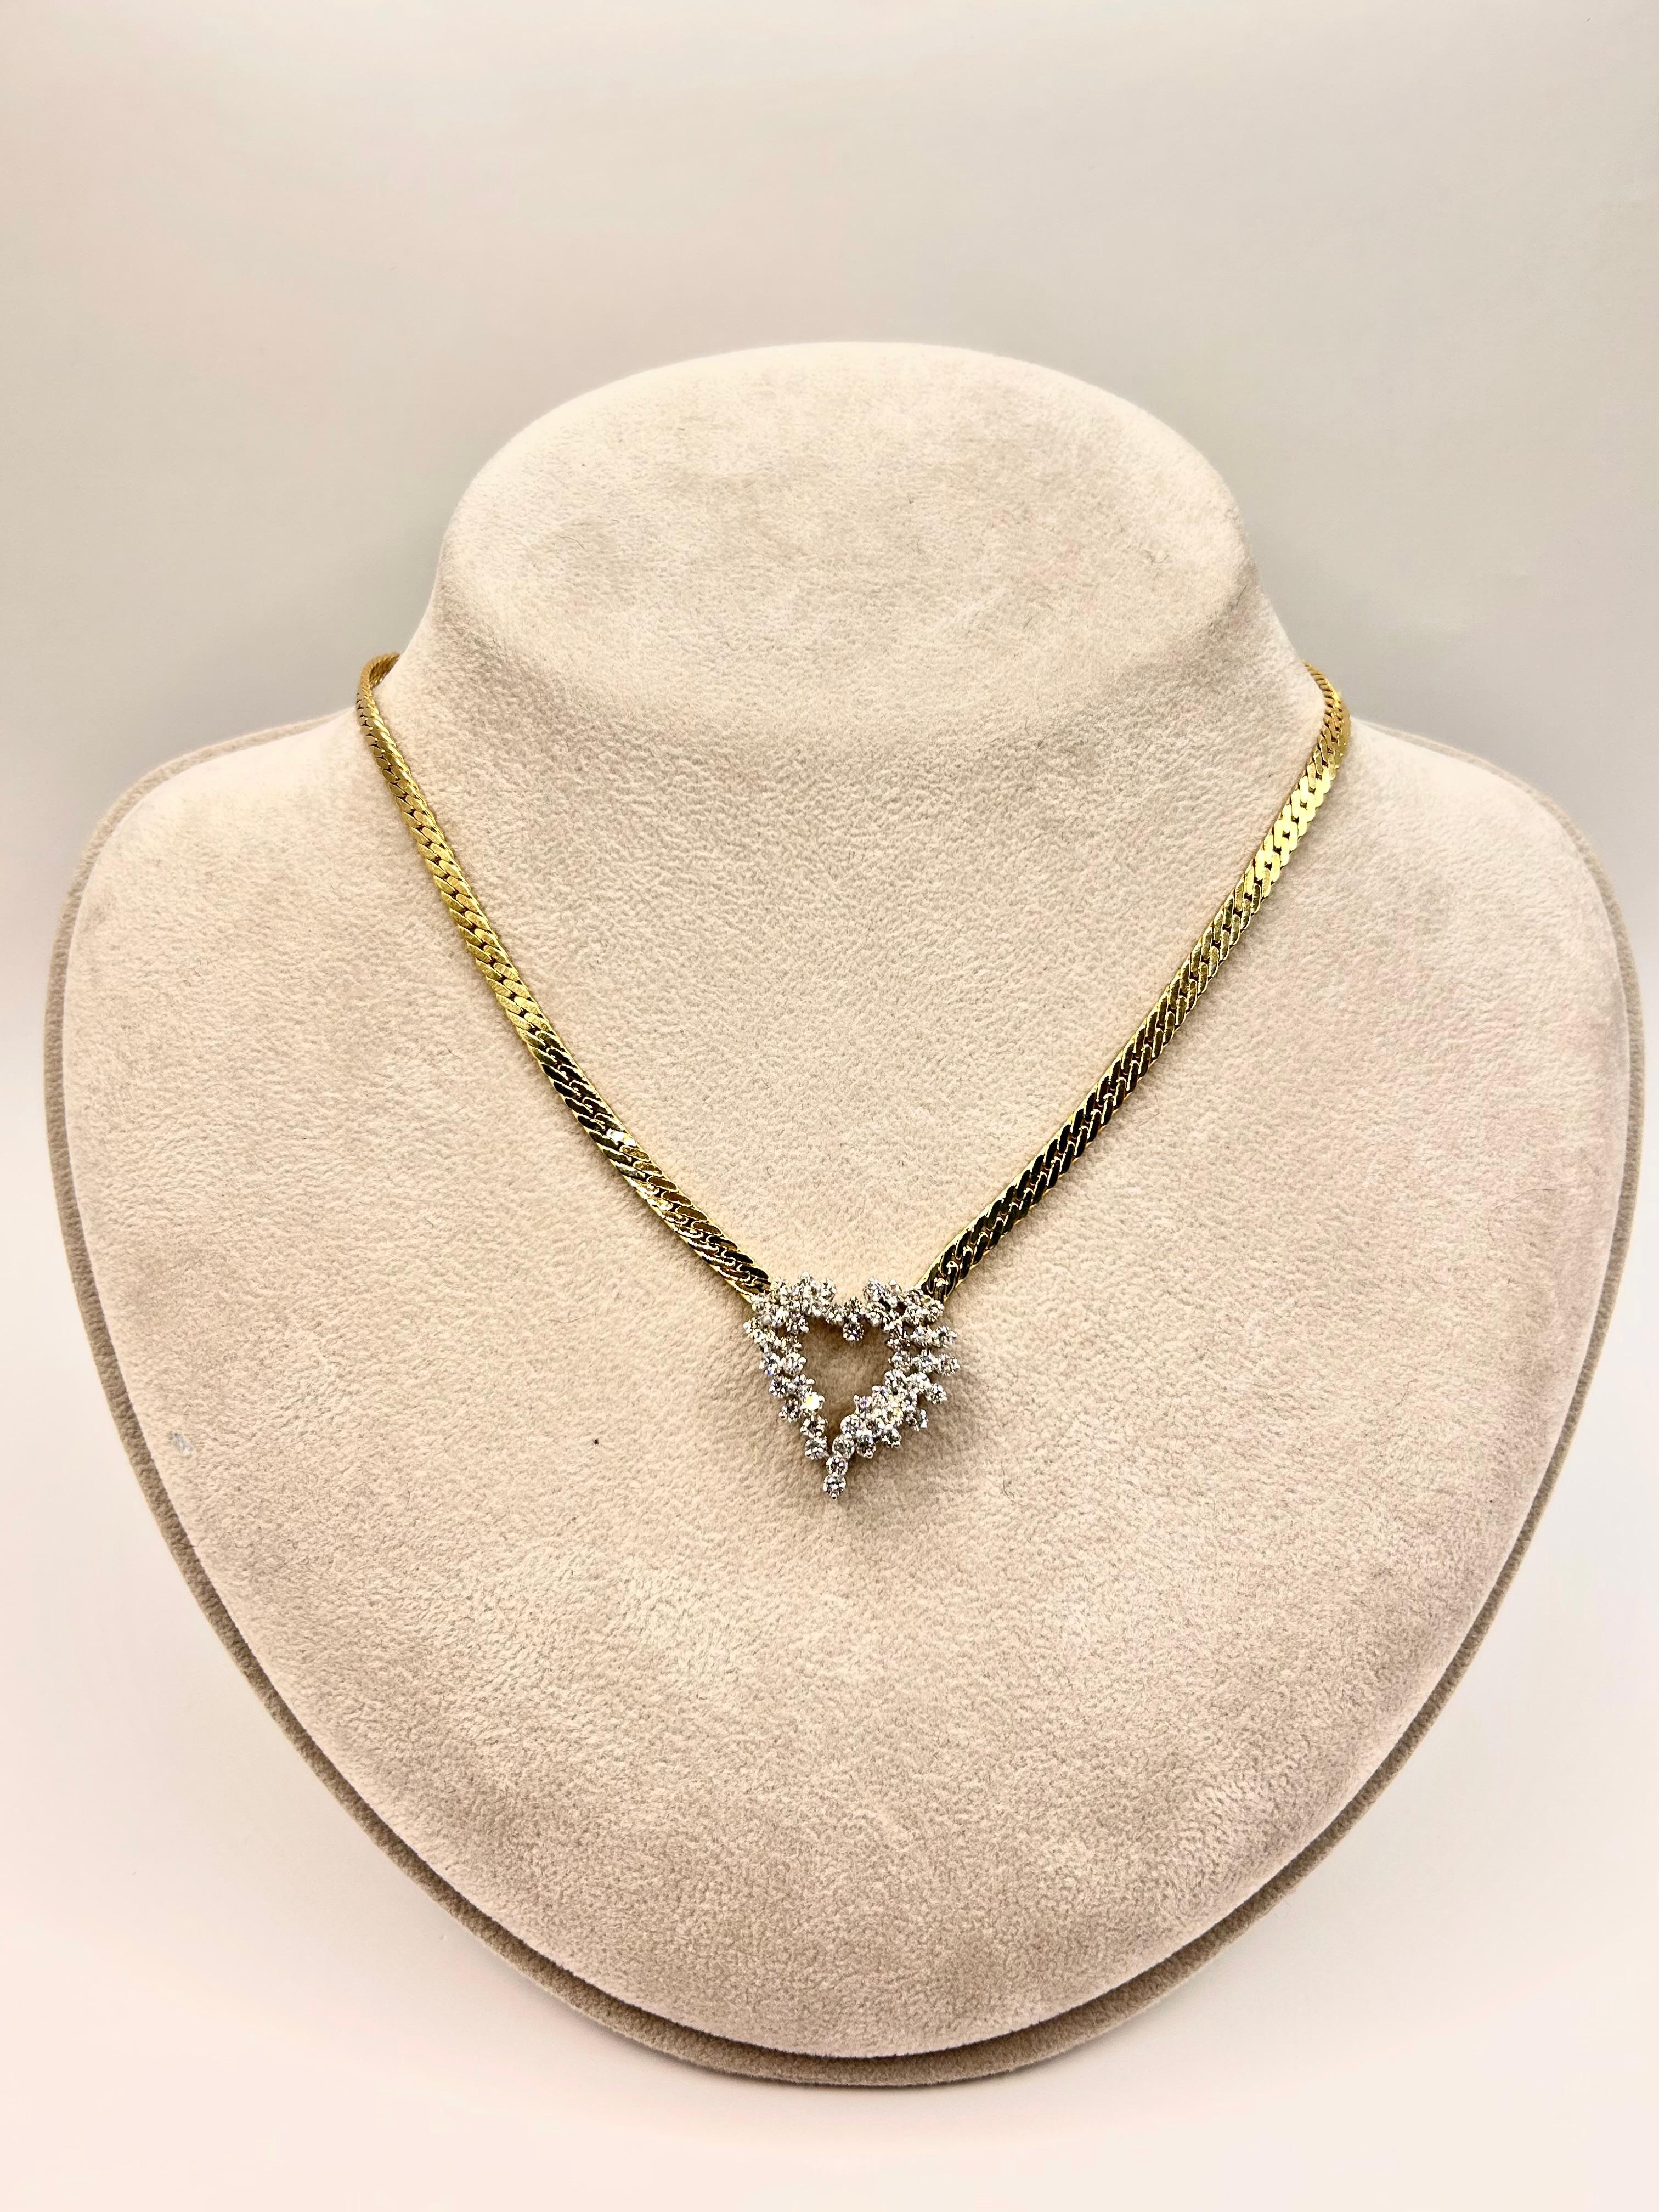 Brilliant Cut 14 Karat Yellow Gold Necklace with 2.50 Carat Total Weight of Diamonds